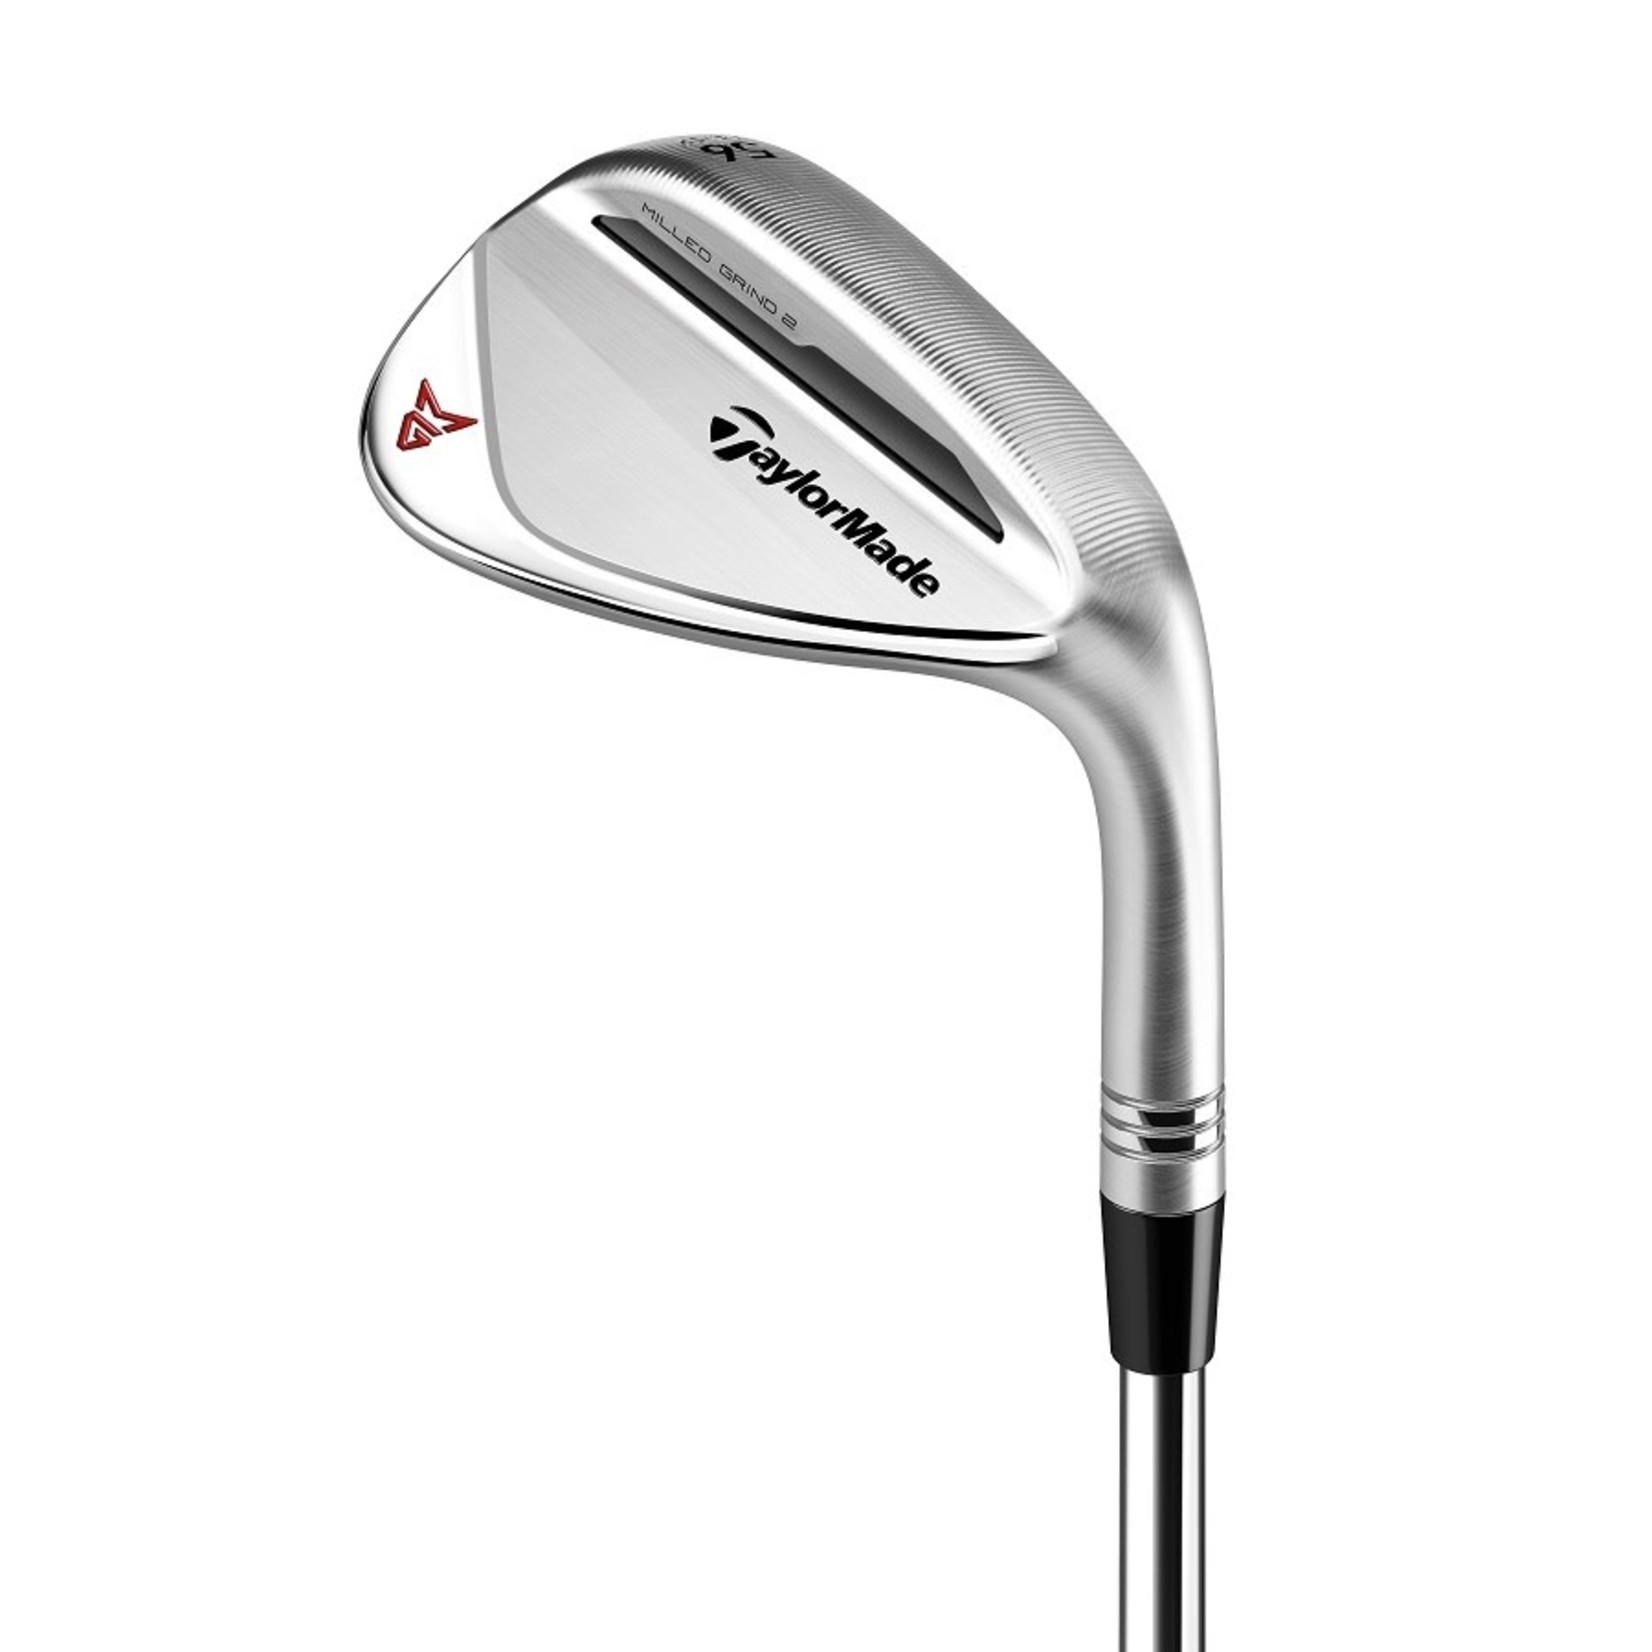 Taylor Made TaylorMade MG2 2.0 Wedge Chrome LH LEFTHANDED 52.09 graden